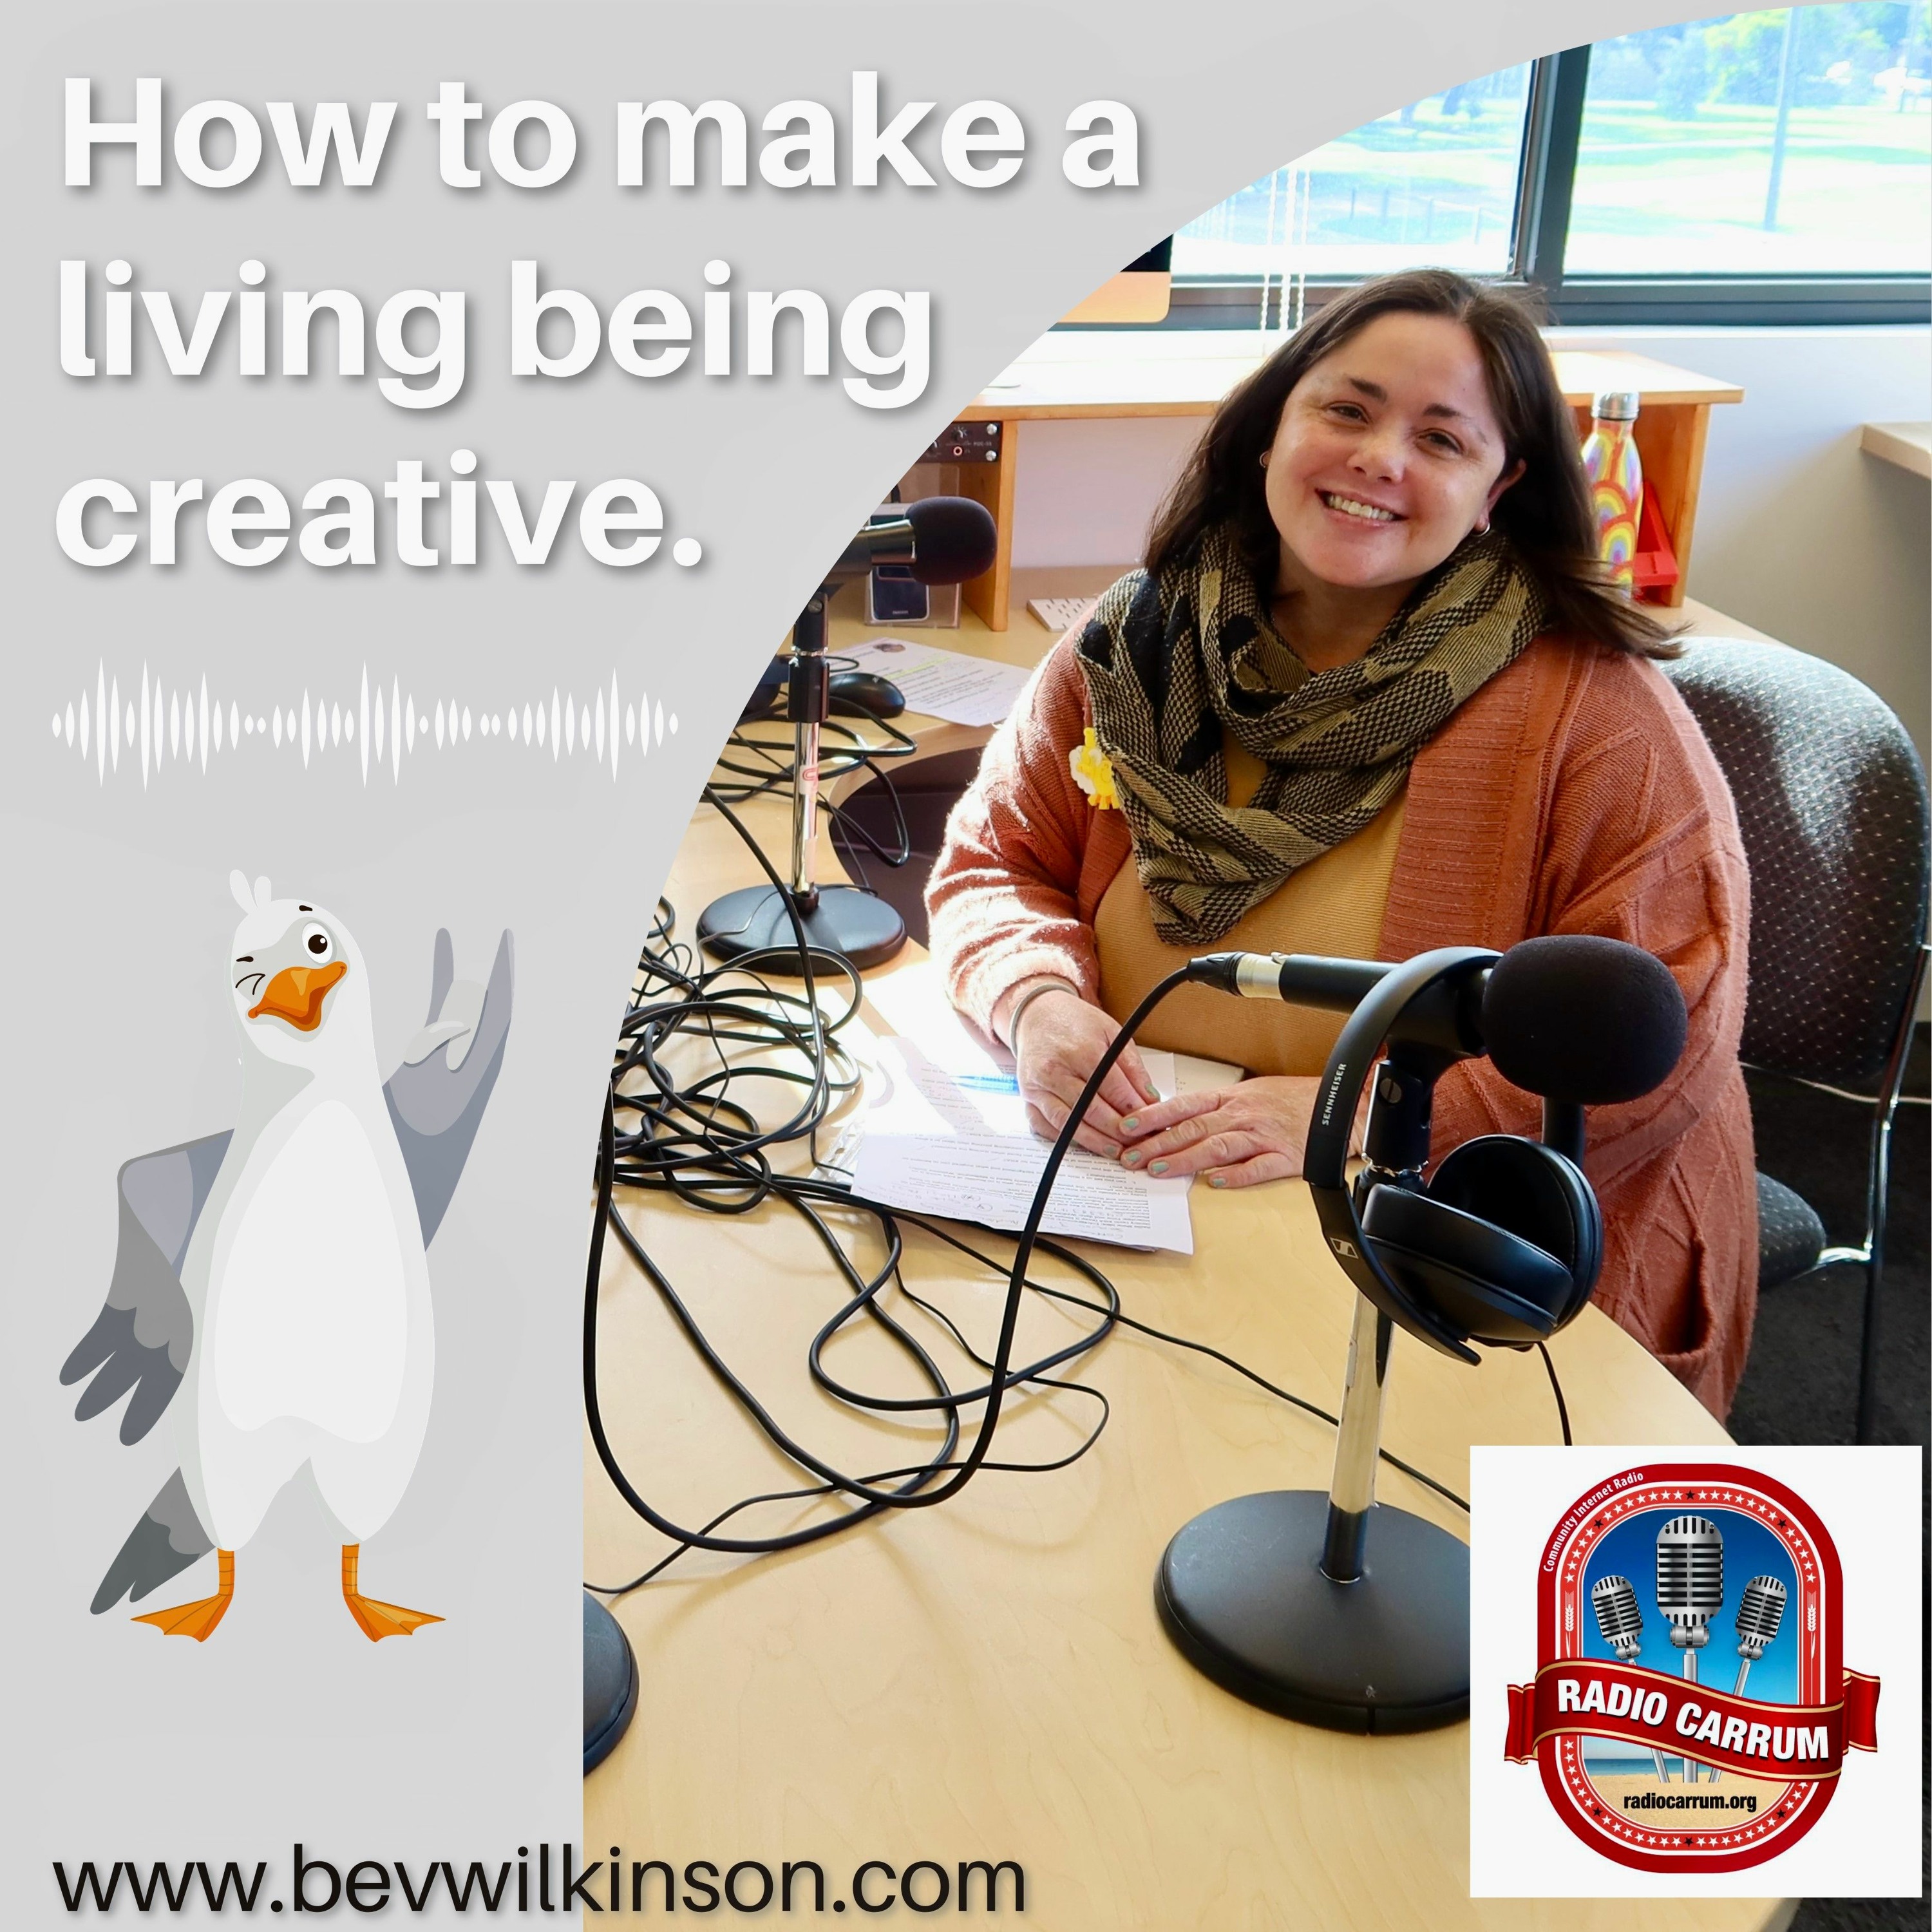 How To Make A Living Being Creative - Episode 5